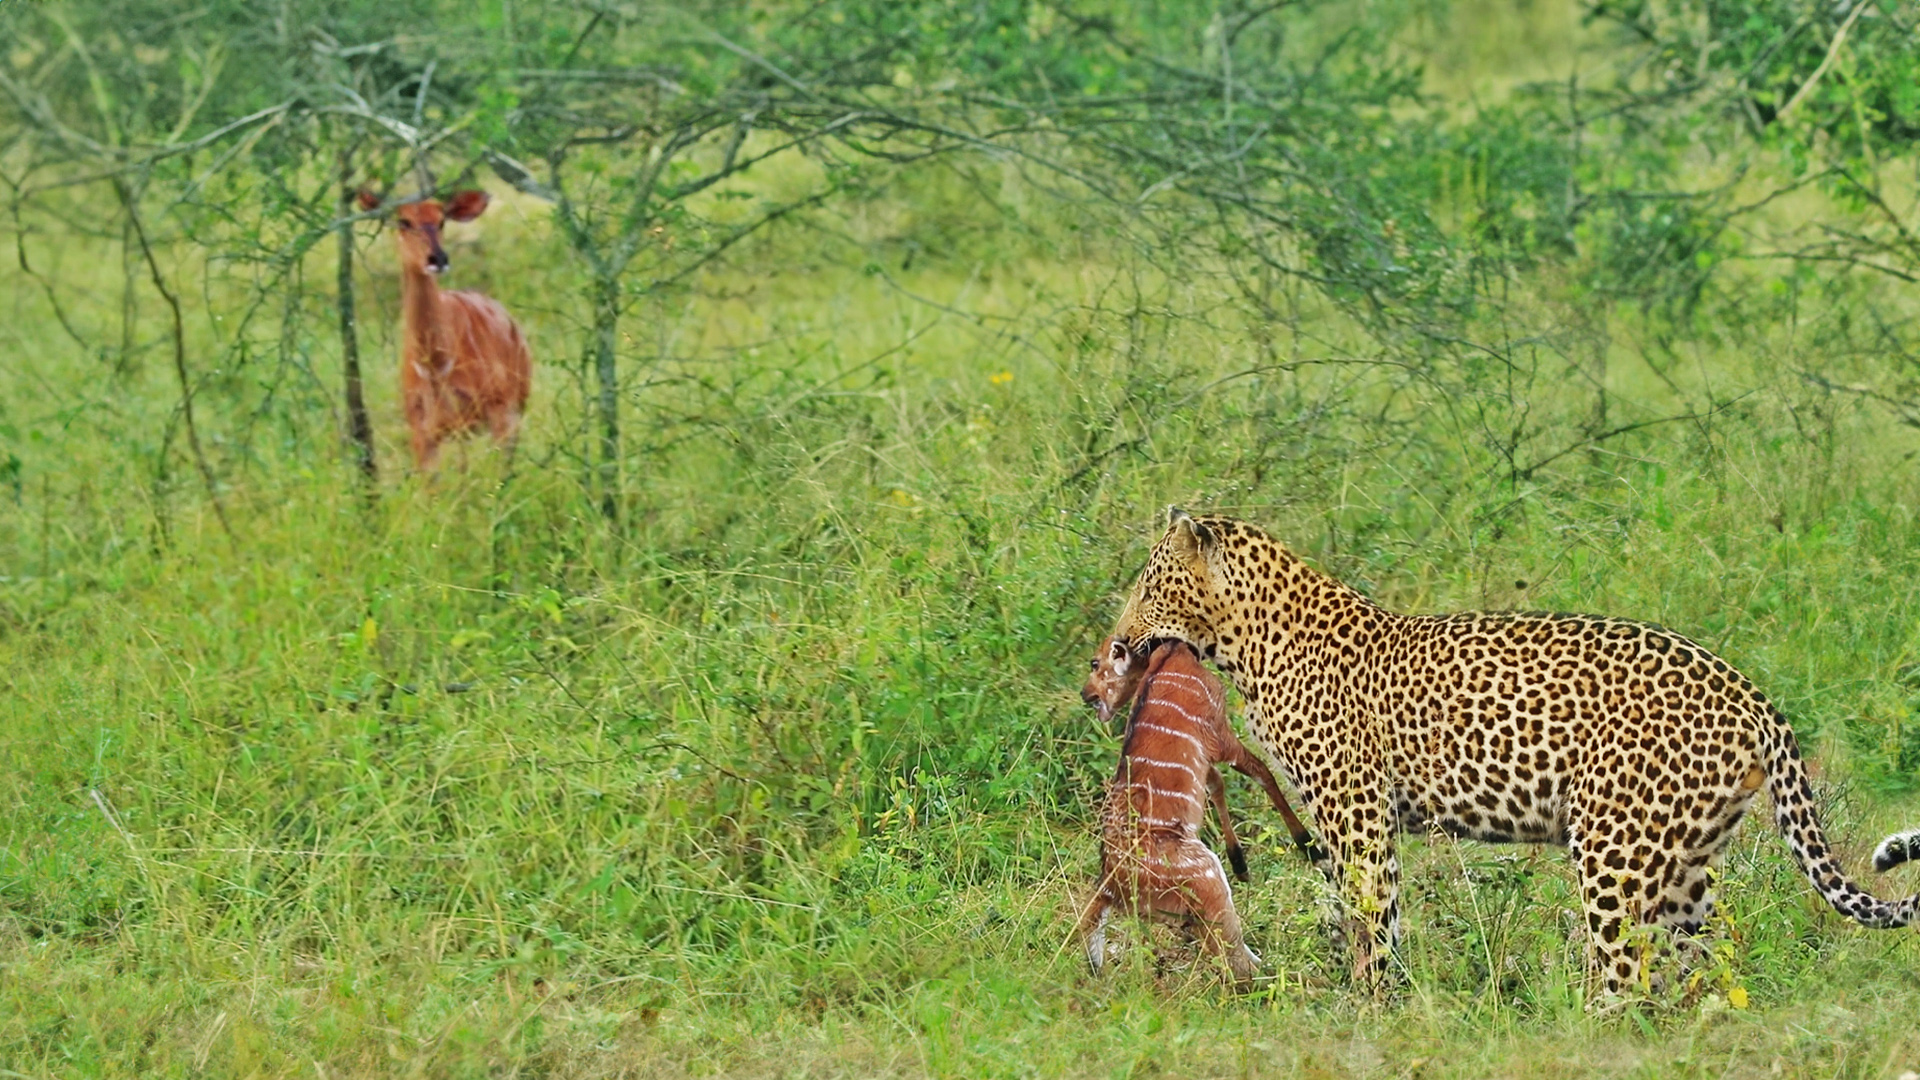 Mom Watches as Leopard Catches her Calf